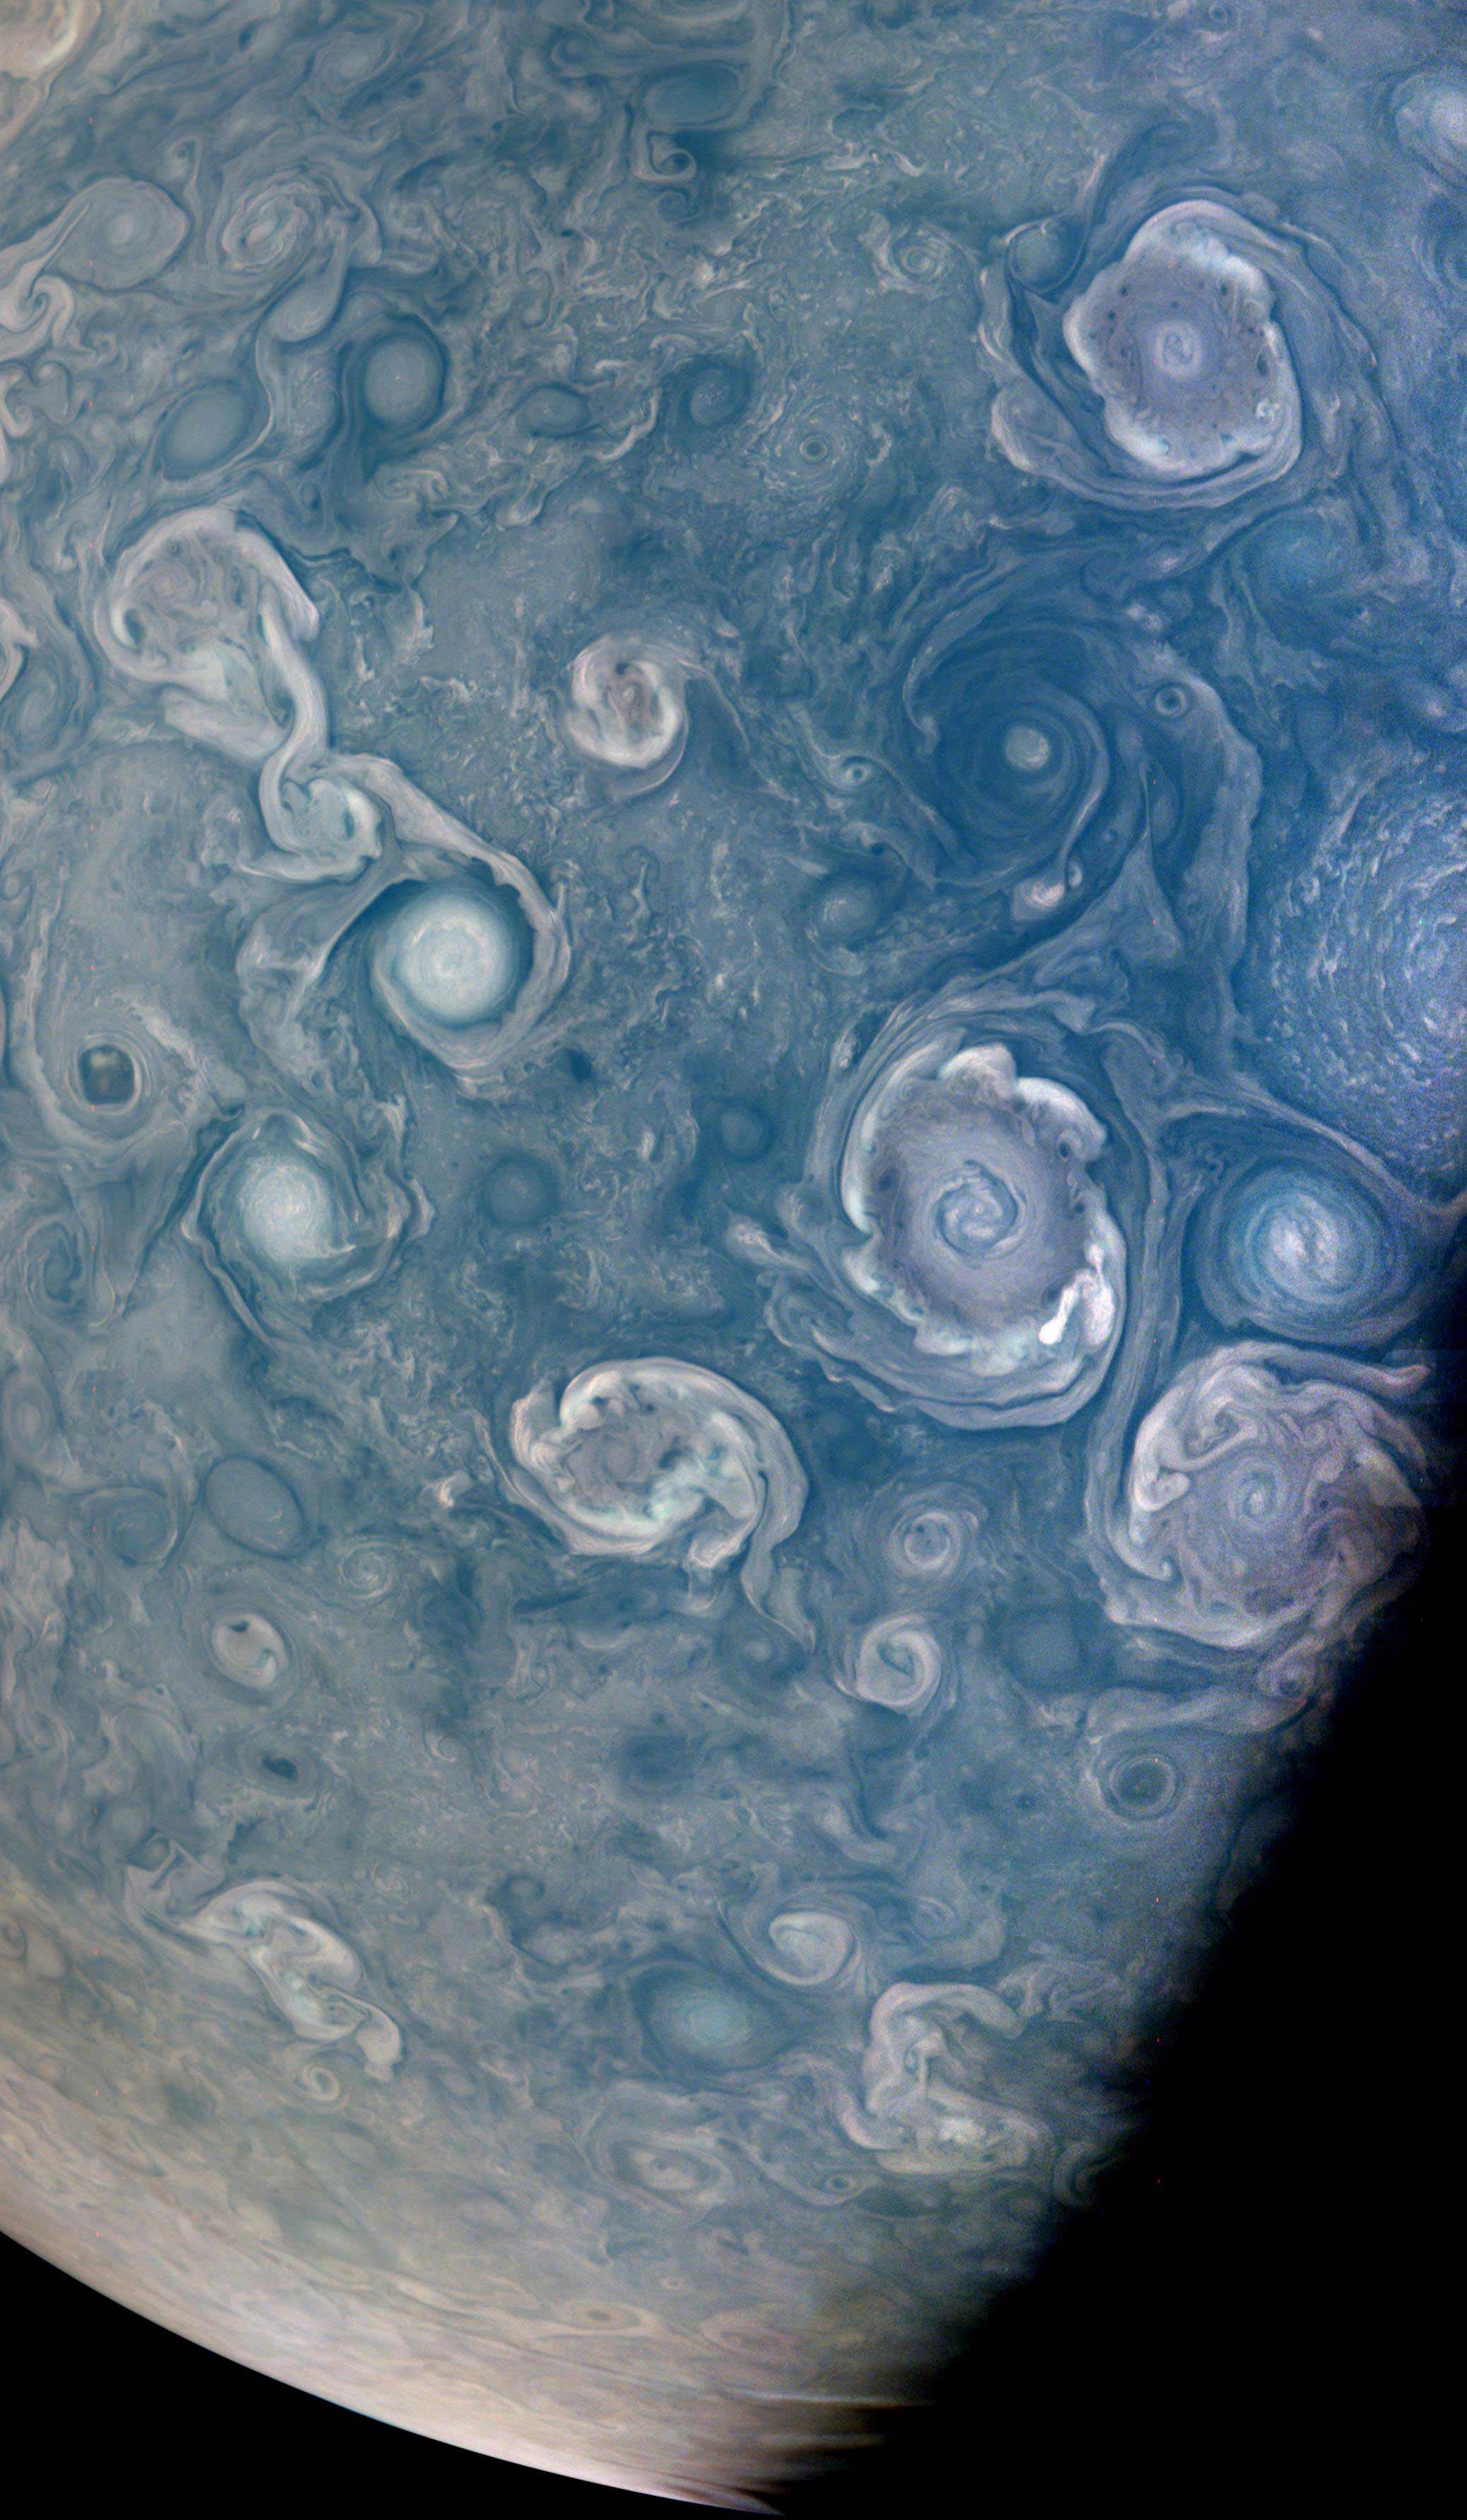 NASA&#39;s JunoCam captured this dazzling view near Jupiter&#39;s north pole on July 5. The spiral shaped vortices are wind patterns from storms.